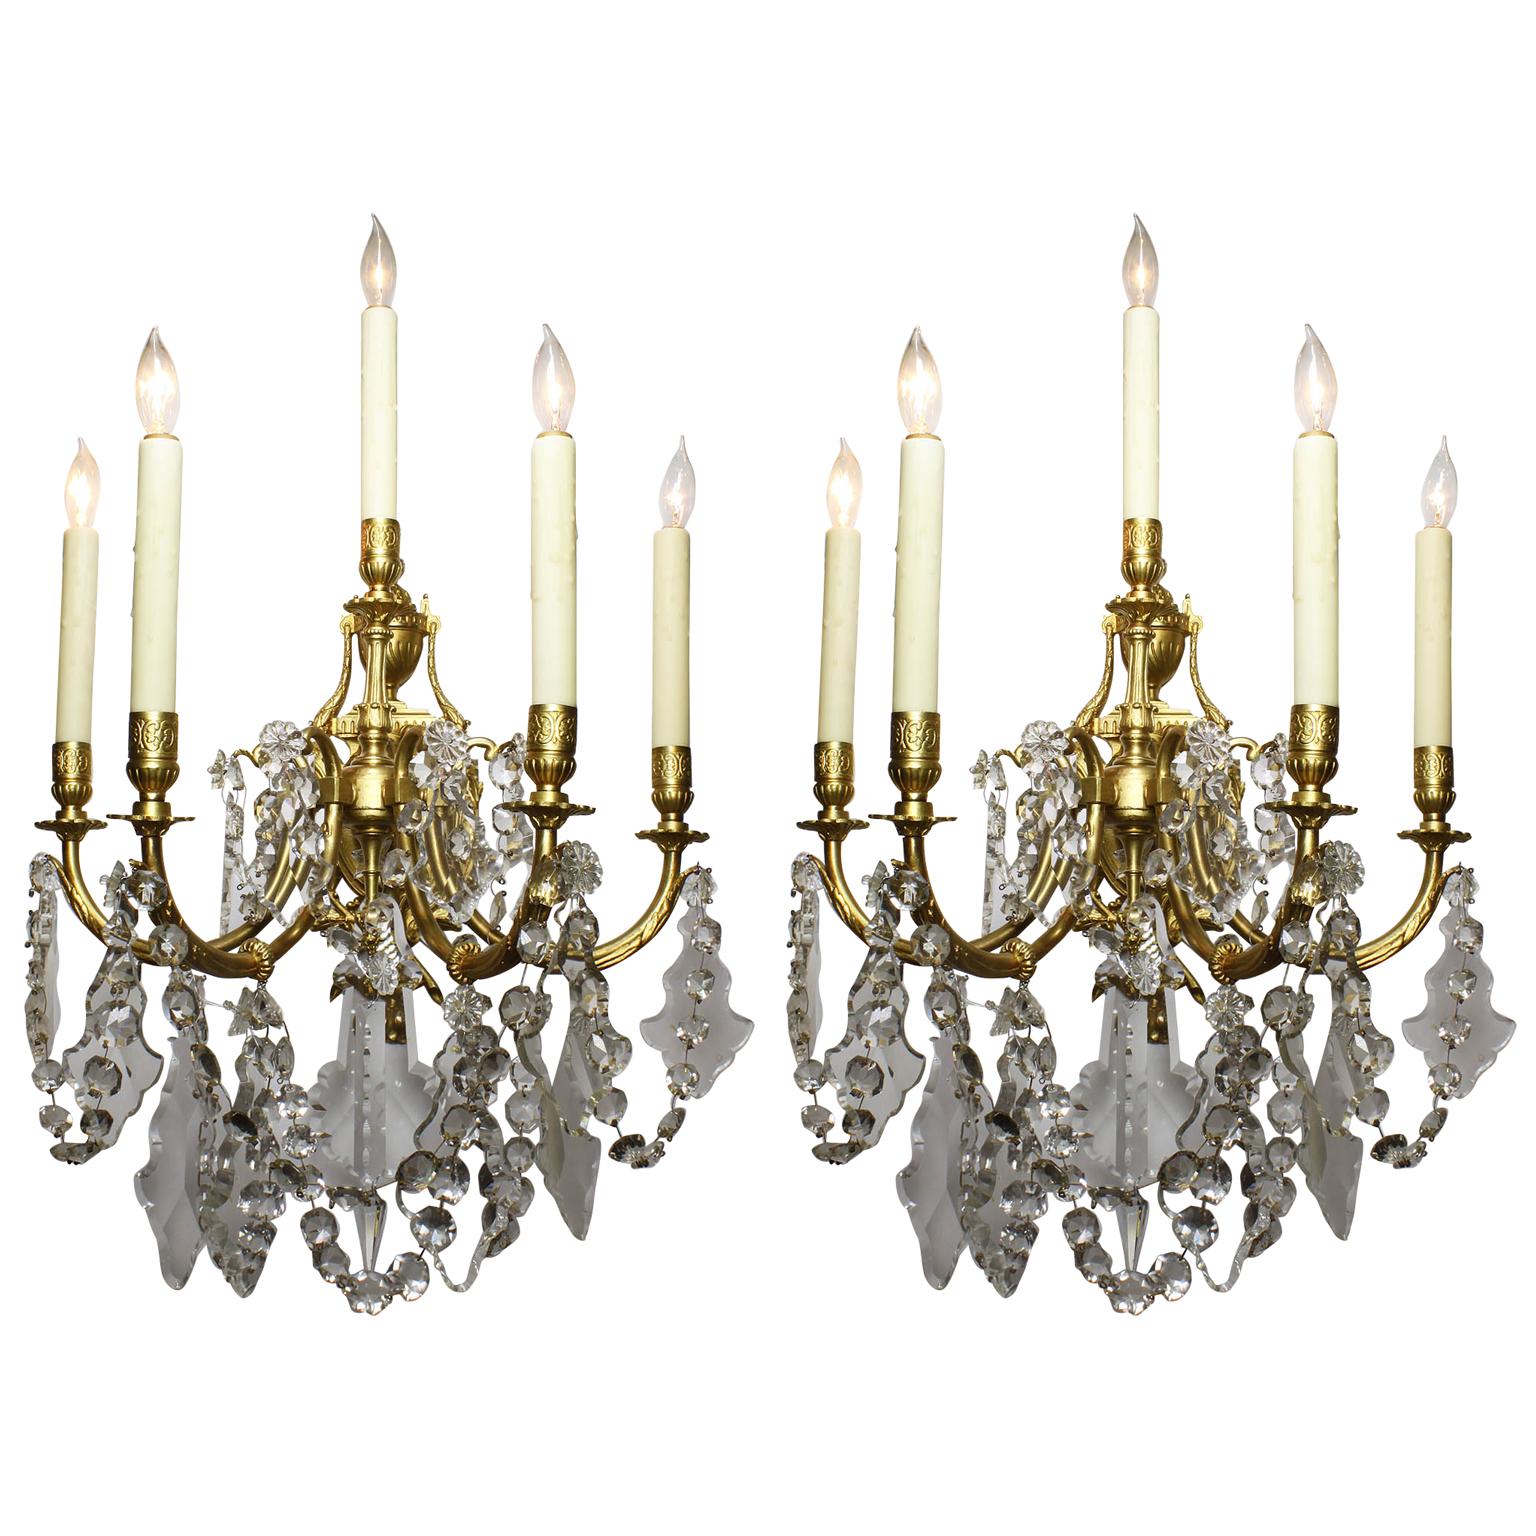 Pair of French Louis XV Style Gilt-Bronze and Cut-Glass Wall Lights